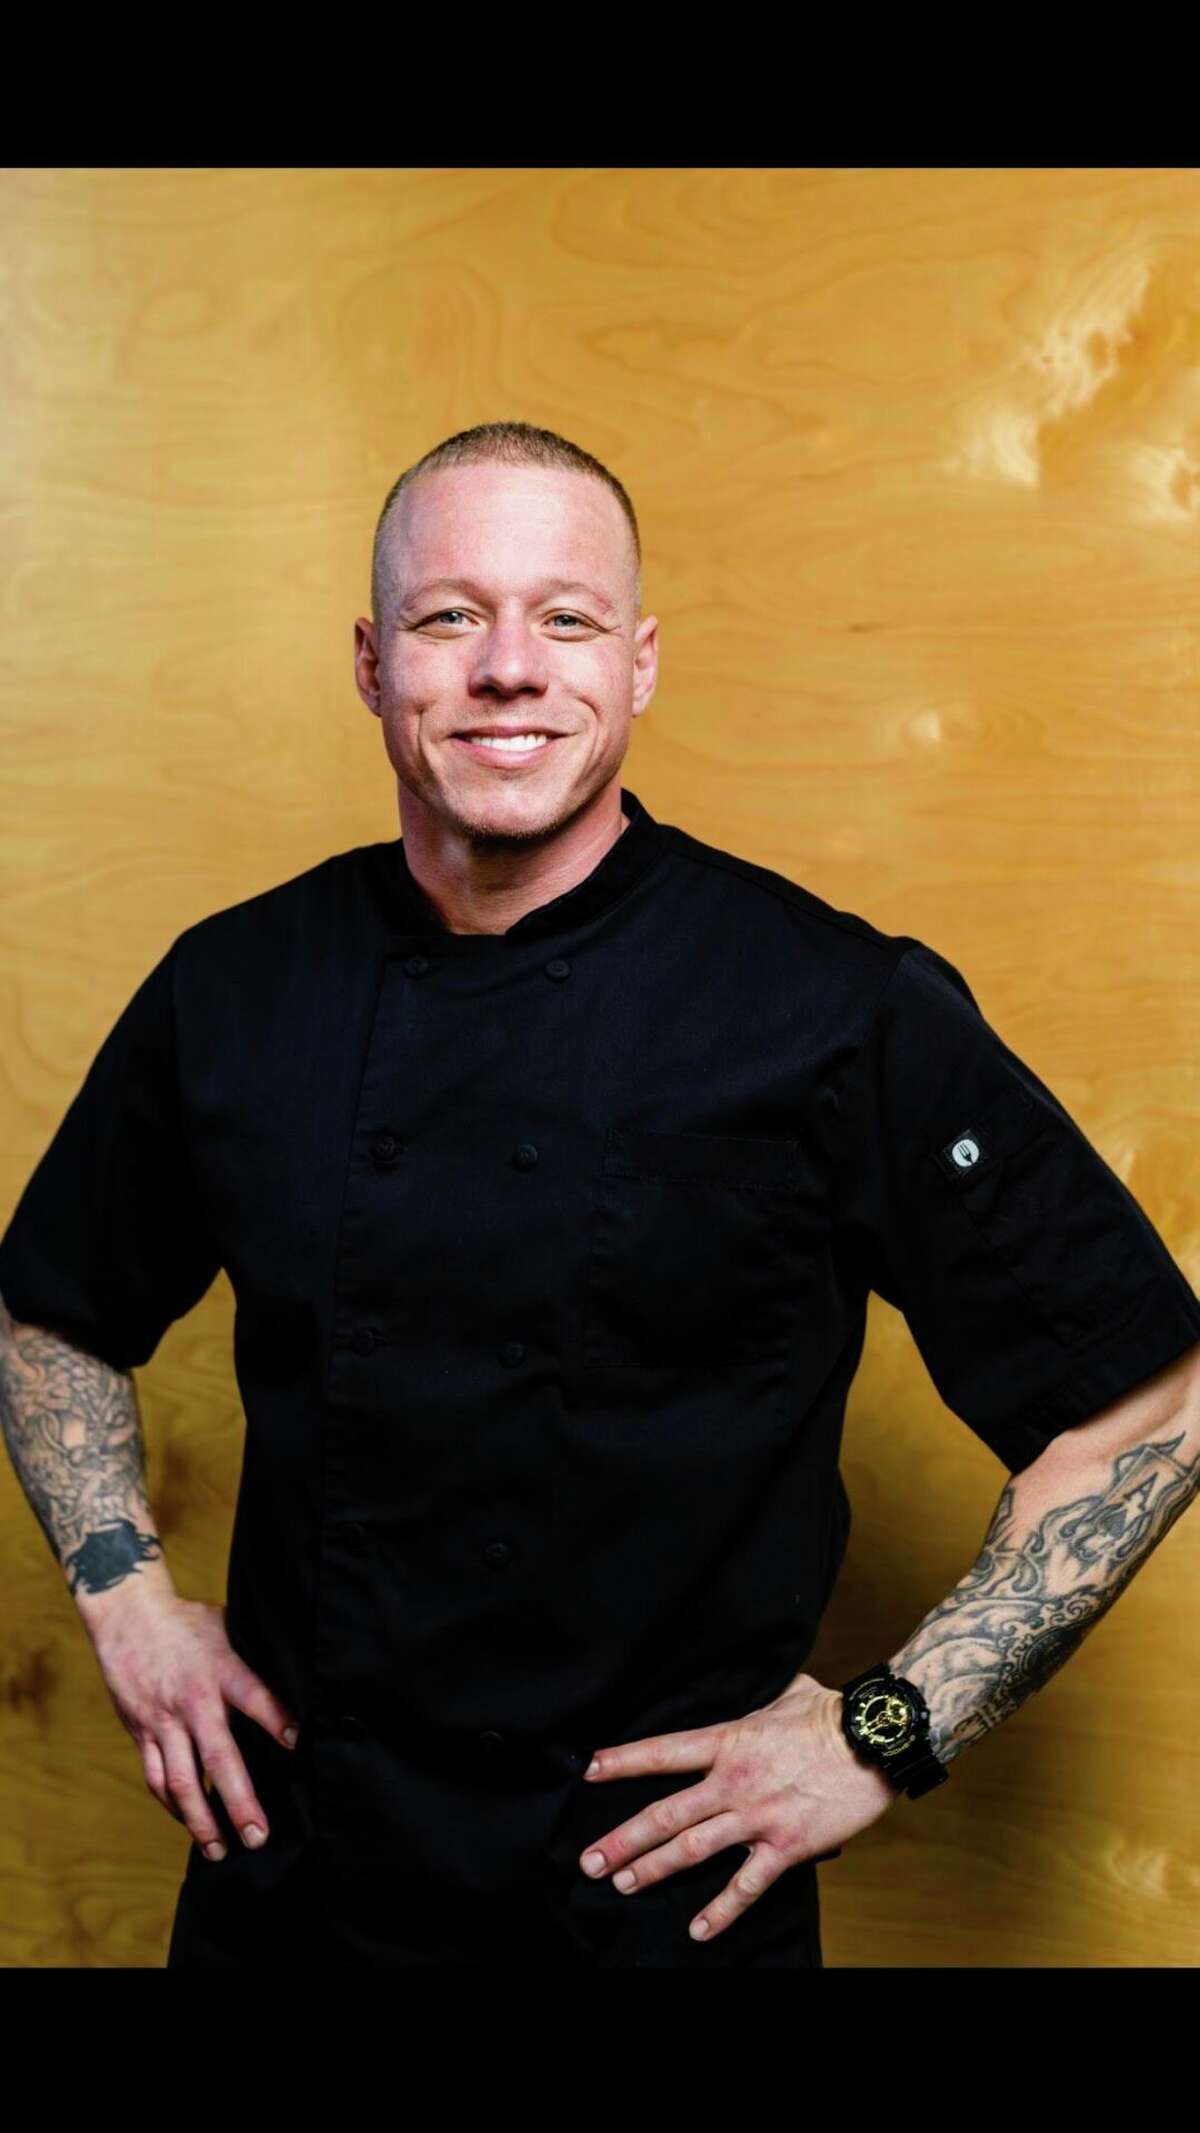 Van Hurd, a “Hell’s Kitchen” alum who moved to Connecticut 12 years ago, is heading up Citizen Chicken and Donuts in West Hartford.